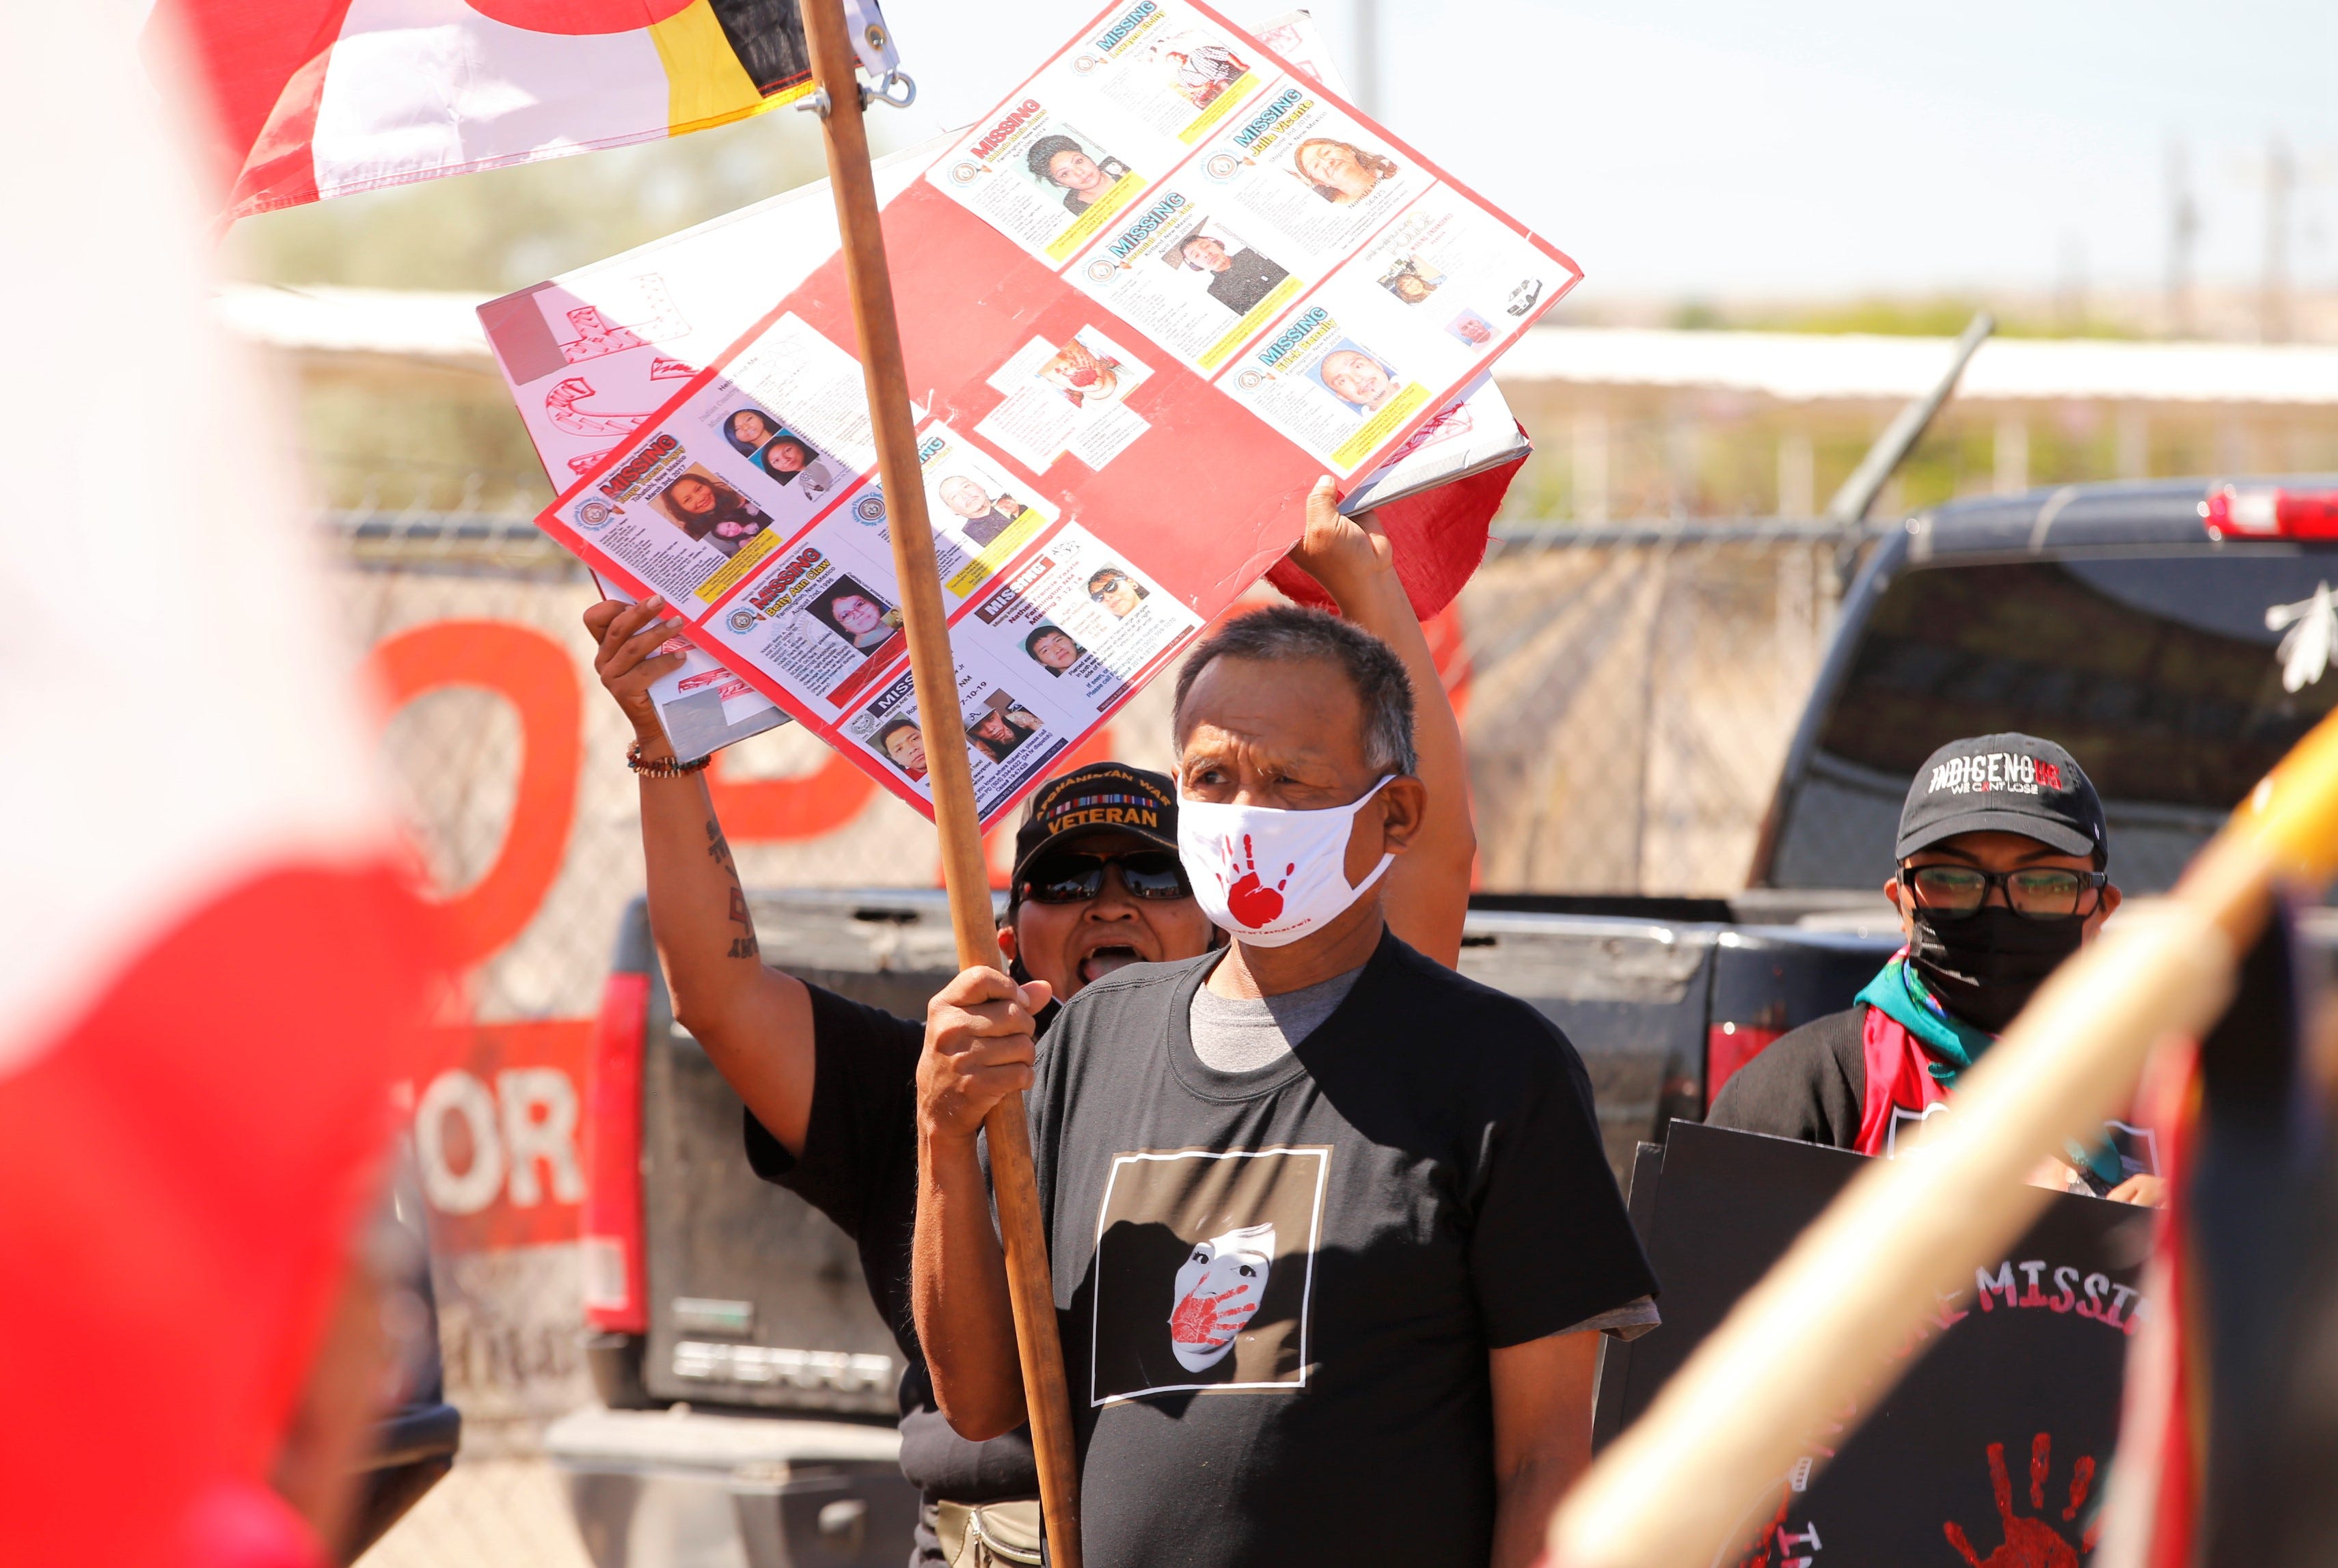 Lester Johnson Sr. participates in the Missing and Murdered Indigenous Women Memorial Honor Walk on May 5 in Shiprock.